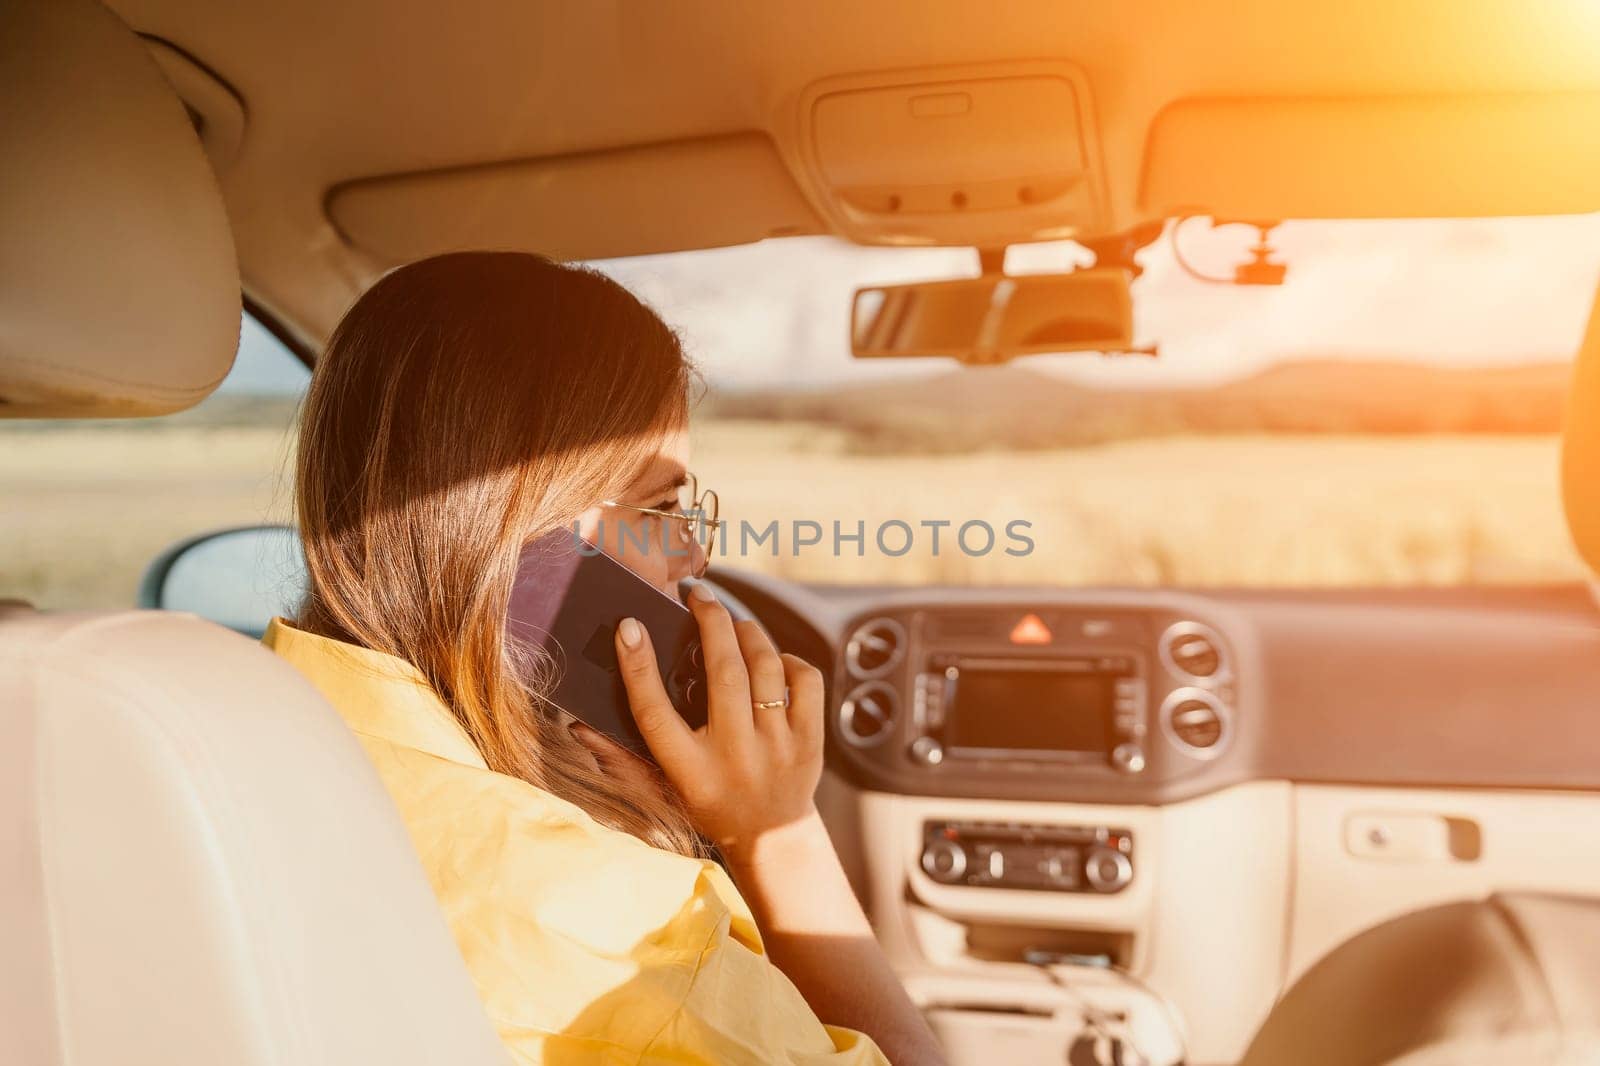 Relaxed business woman talking on video call on phone in automobile. Rested female professional saying bye on video chat in business car. Beautiful lady making video message in luxury car.